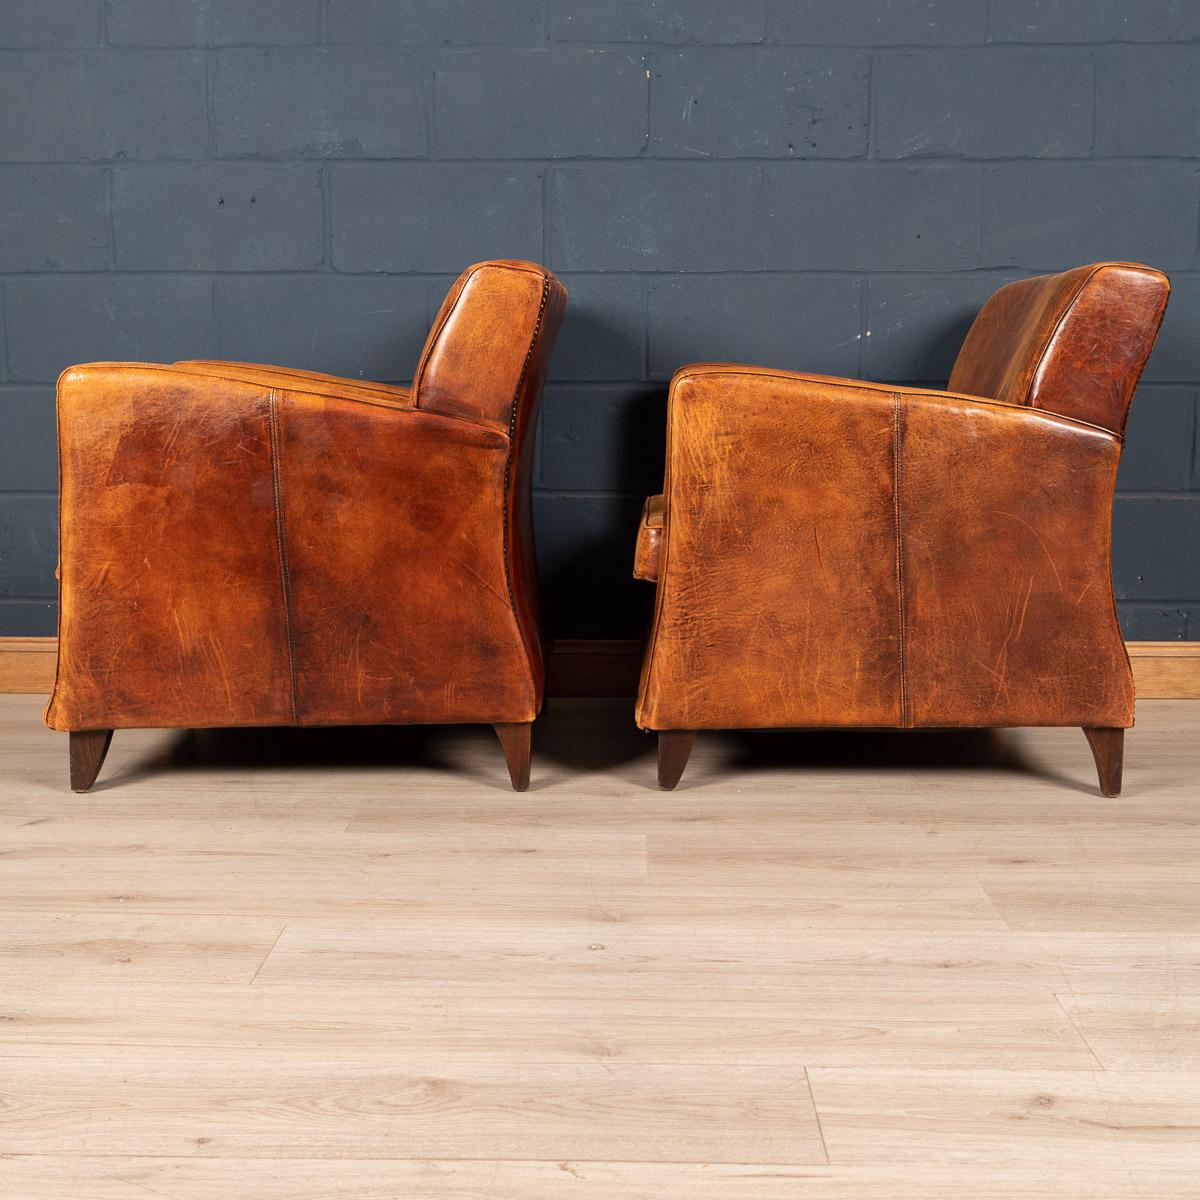 Showing superb patina and colour, this wonderful pair of club chairs were hand upholstered sheepskin leather in Holland by the finest craftsmen. An unusual Art Deco style model and of excellent quality. Fantastic look for any interior, both modern